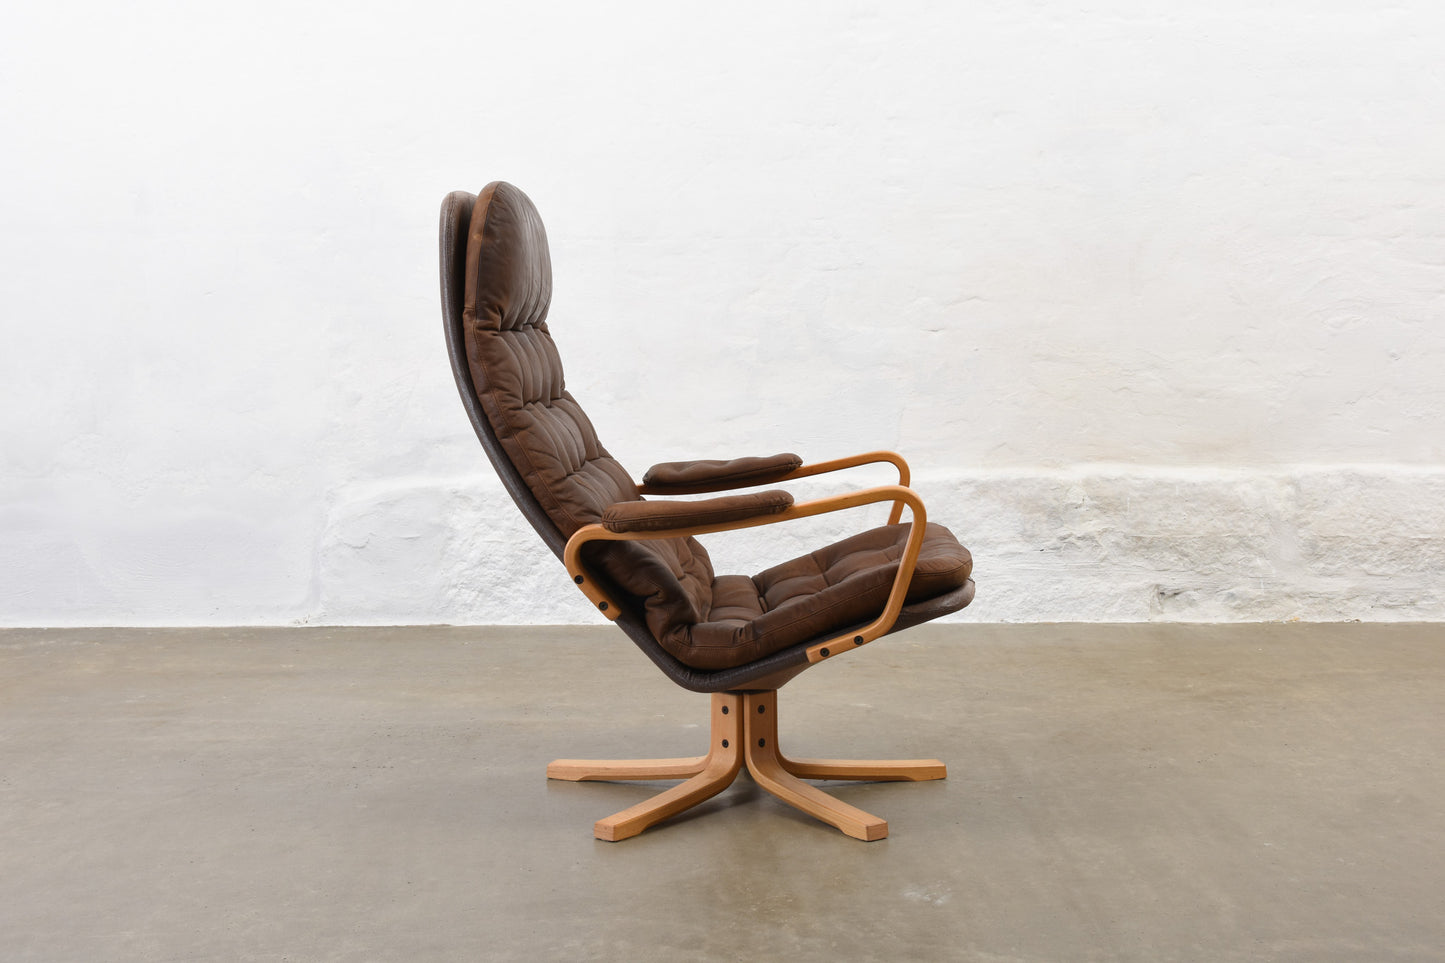 1960s leather swivel chair by Sam Larsson